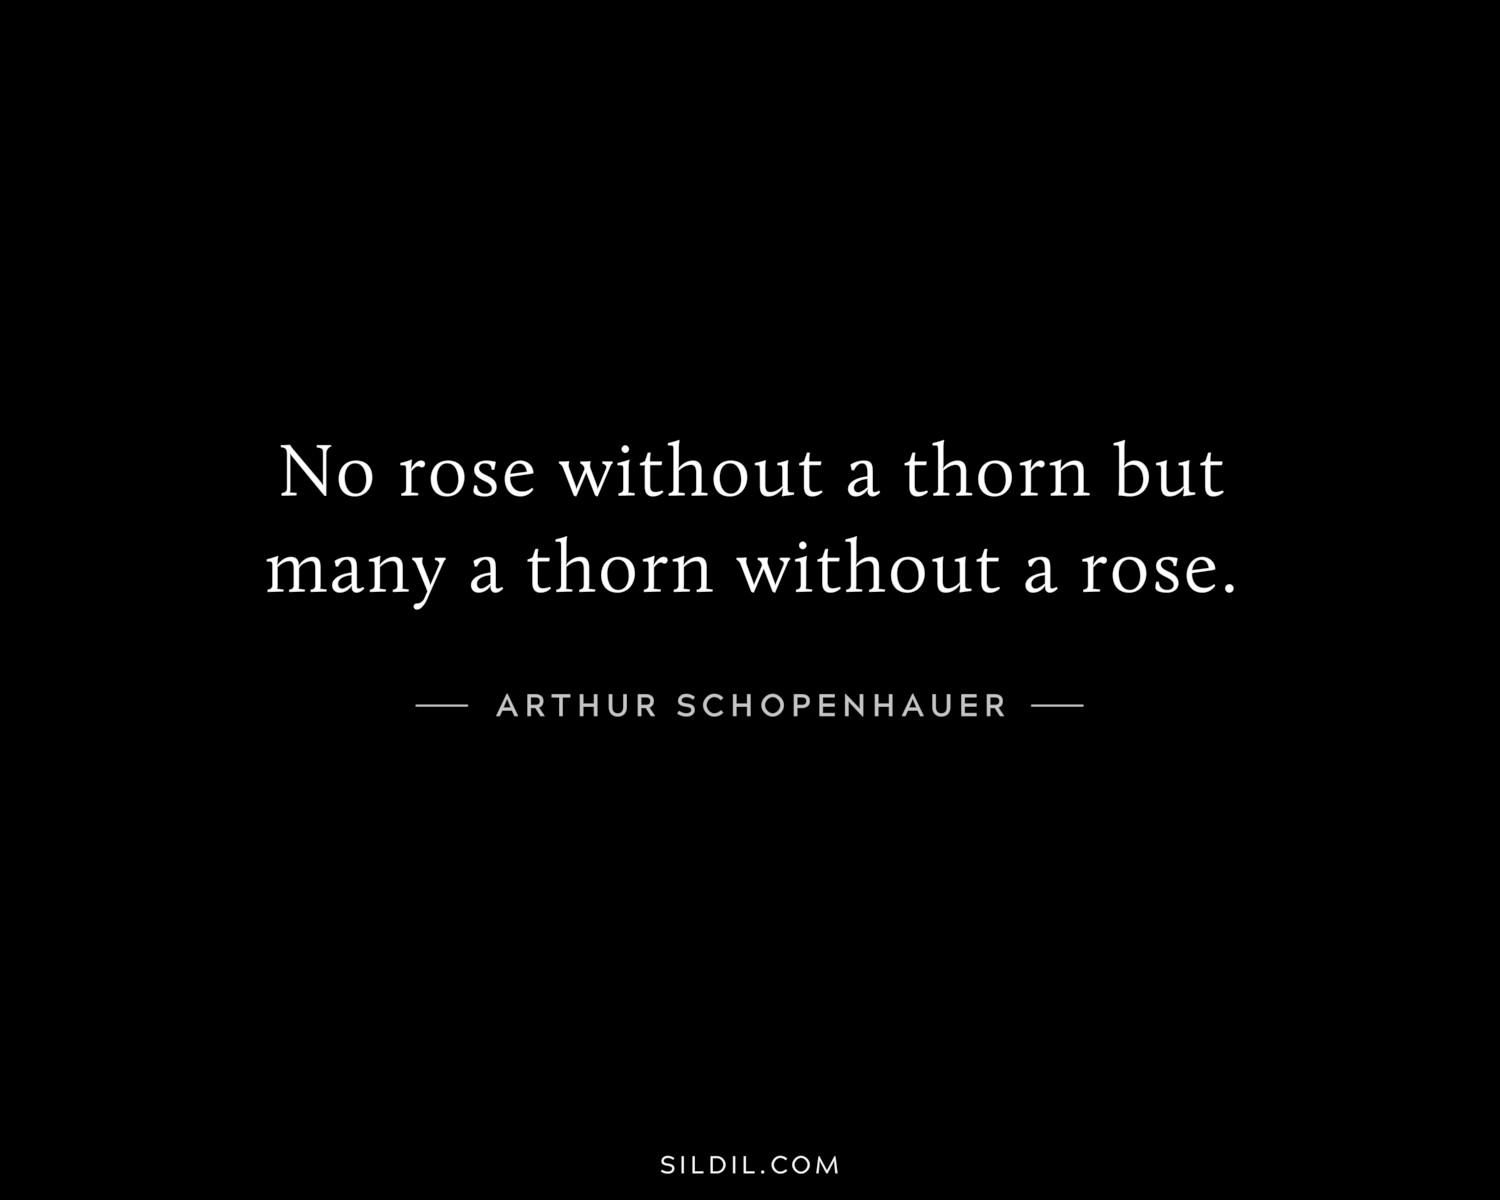 No rose without a thorn but many a thorn without a rose.